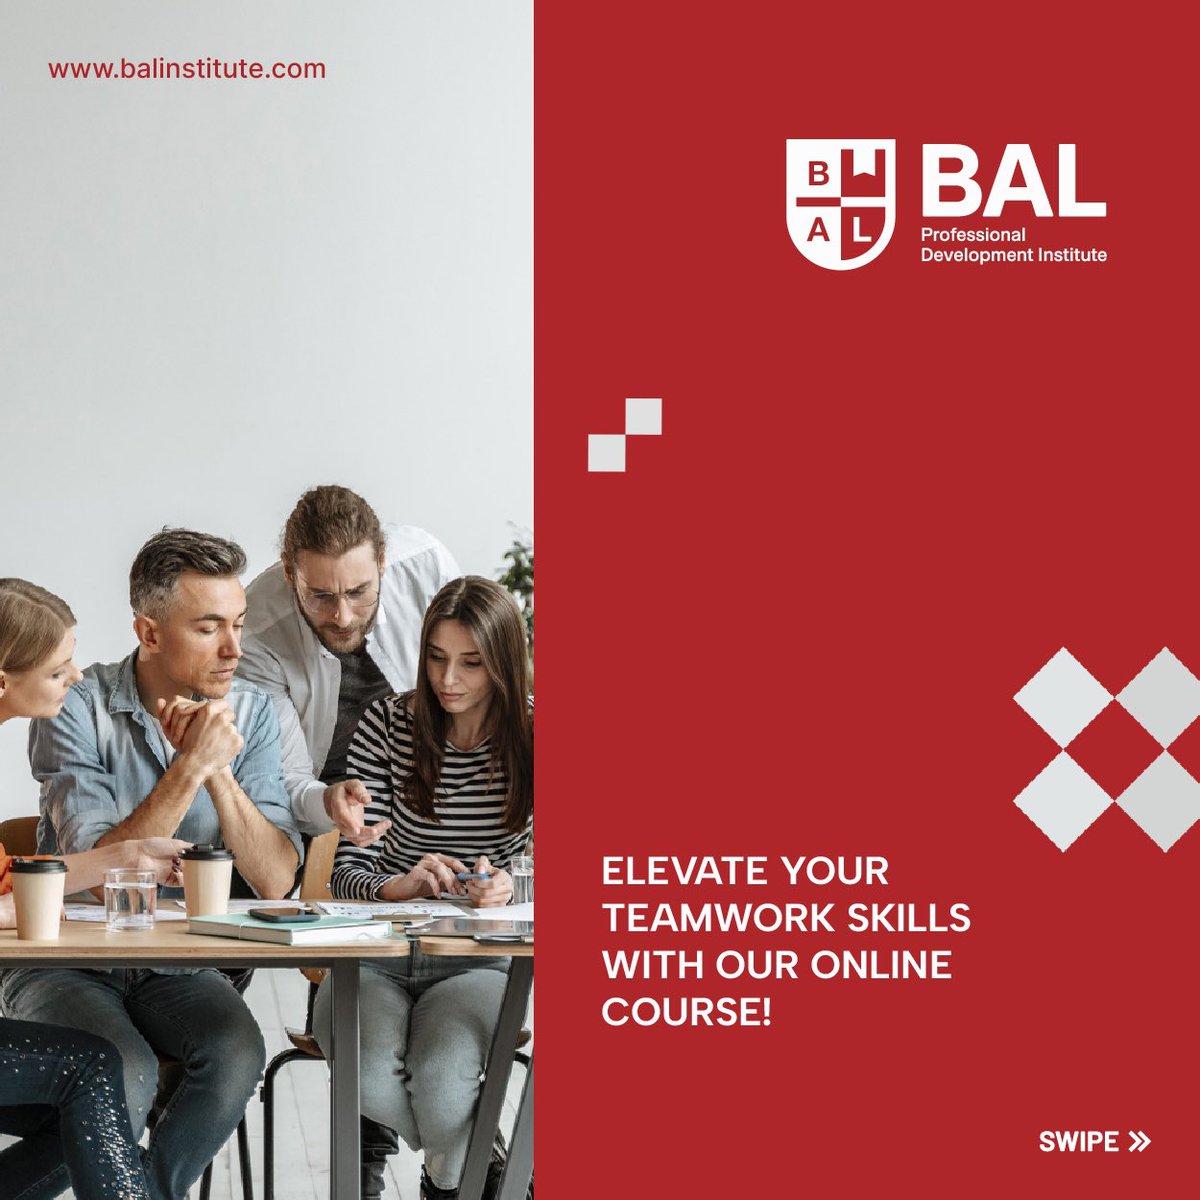 Meet your goals with our online learning courses today.

#startlearning #learningfromhome #onlineducation #onlinelearning #balinstitute #joinourcourses #télémarketing #onlinecourses #educationplatform #leadership #leadershipdevelopment #leadershipskills #uae #ExploreMore